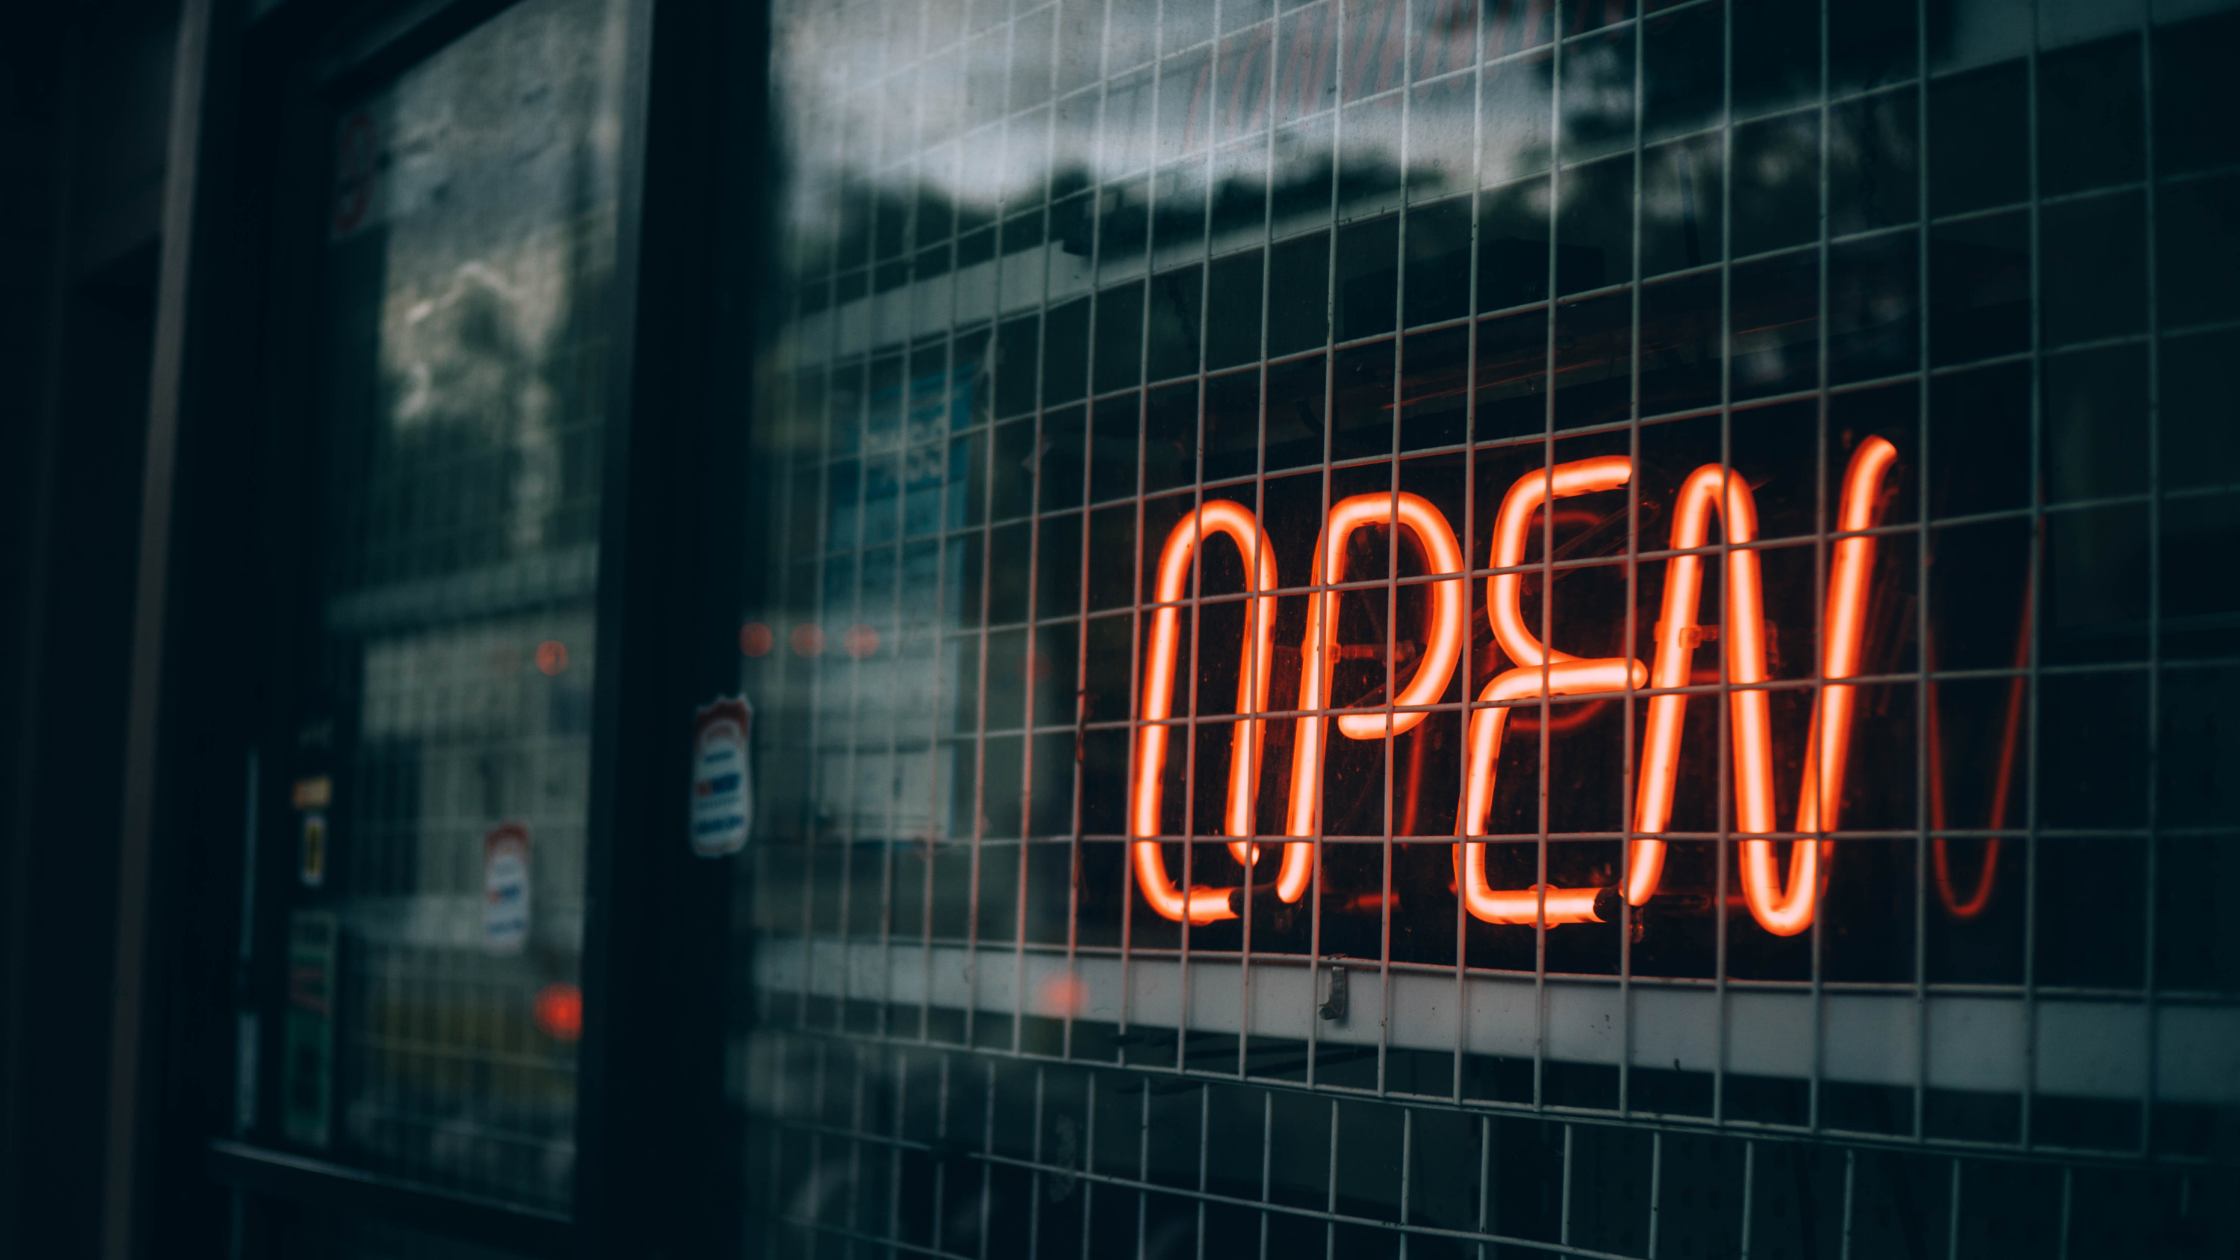 A neon sign that reads "open" in a shop window